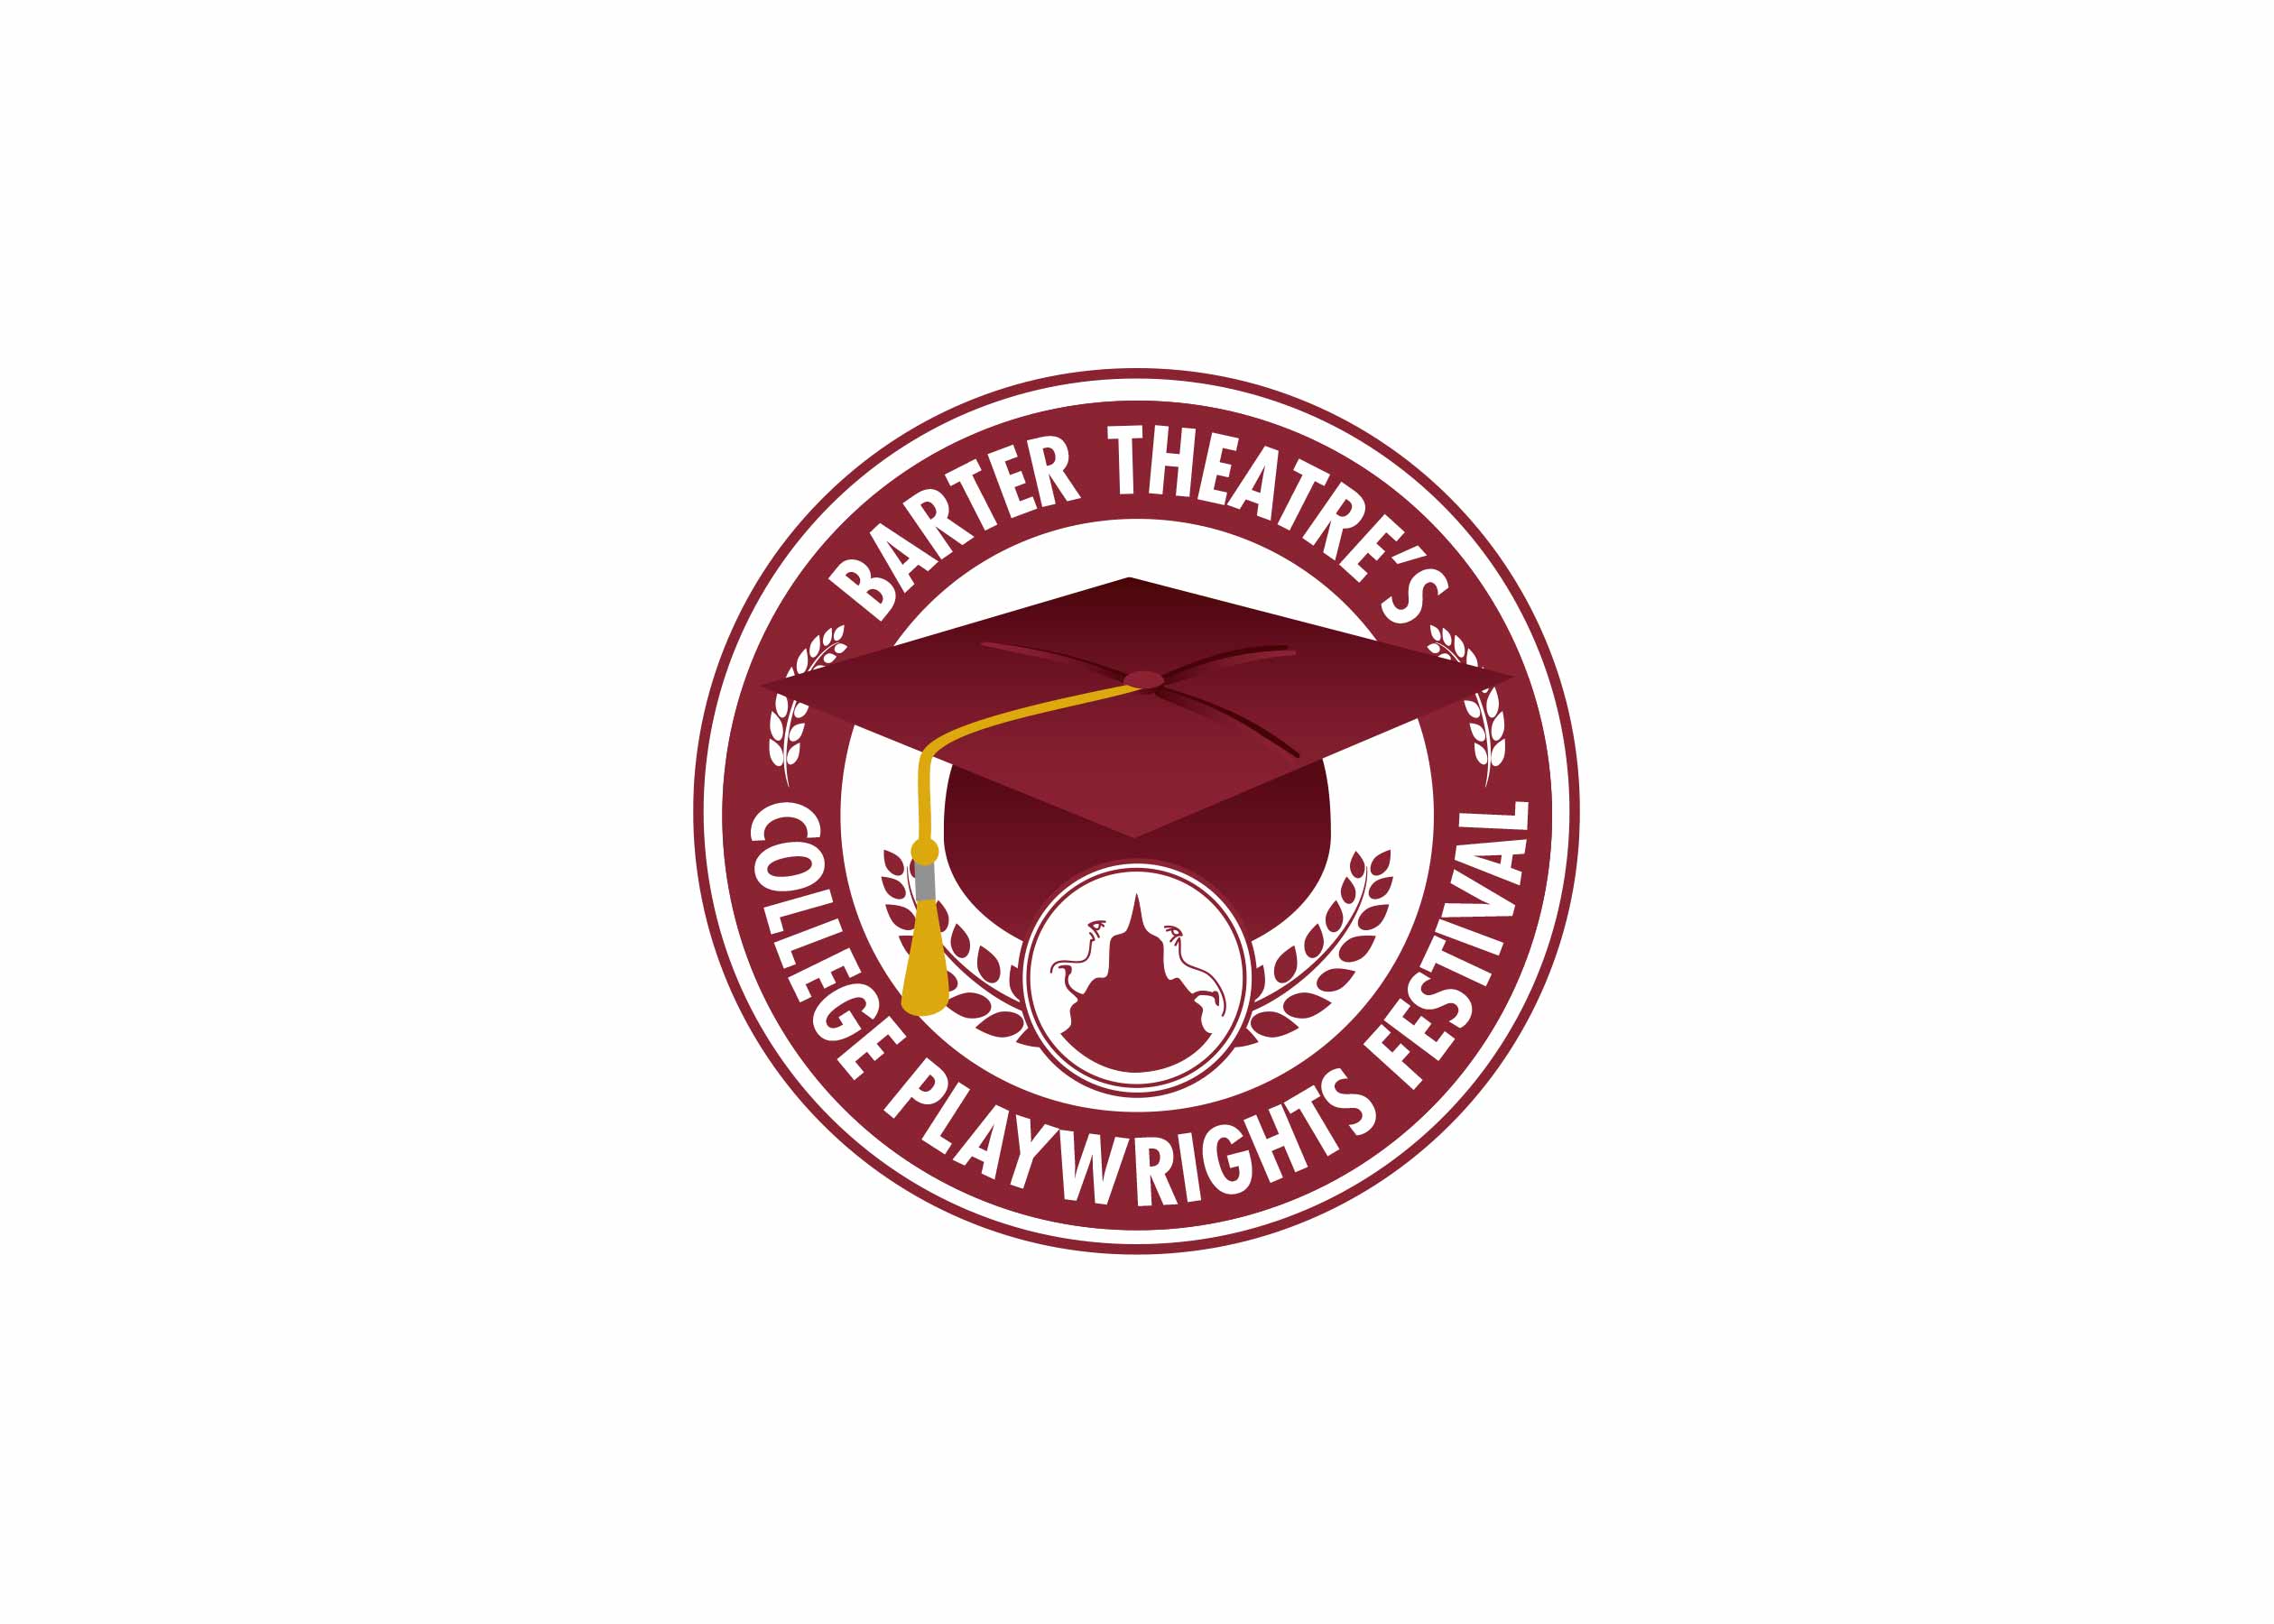 Logo Design for Barter Theatre's College Playwrights Festival